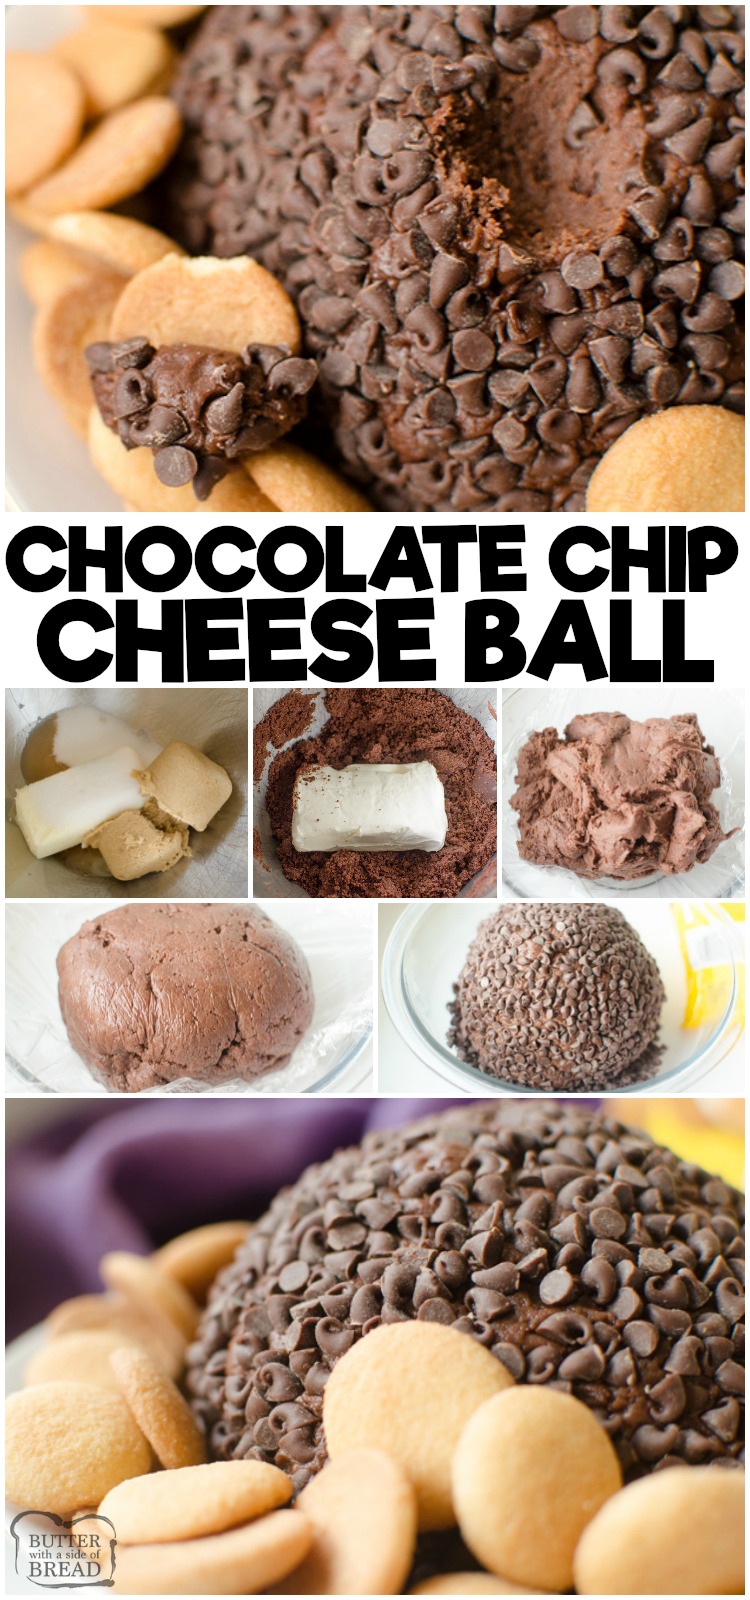 Double Chocolate Chip Cheese Ball is a rich, twice the chocolate cheesecake turned into a sweet cheese ball! The rich chocolate batter combined with the tangy cream cheese then rolled in mini chocolate chips makes this a rich and delicious appetizer or dessert! #cheese #chocolate #chocolatechip #cheeseball #dessert #appetizer #recipe from BUTTER WITH A SIDE OF BREAD